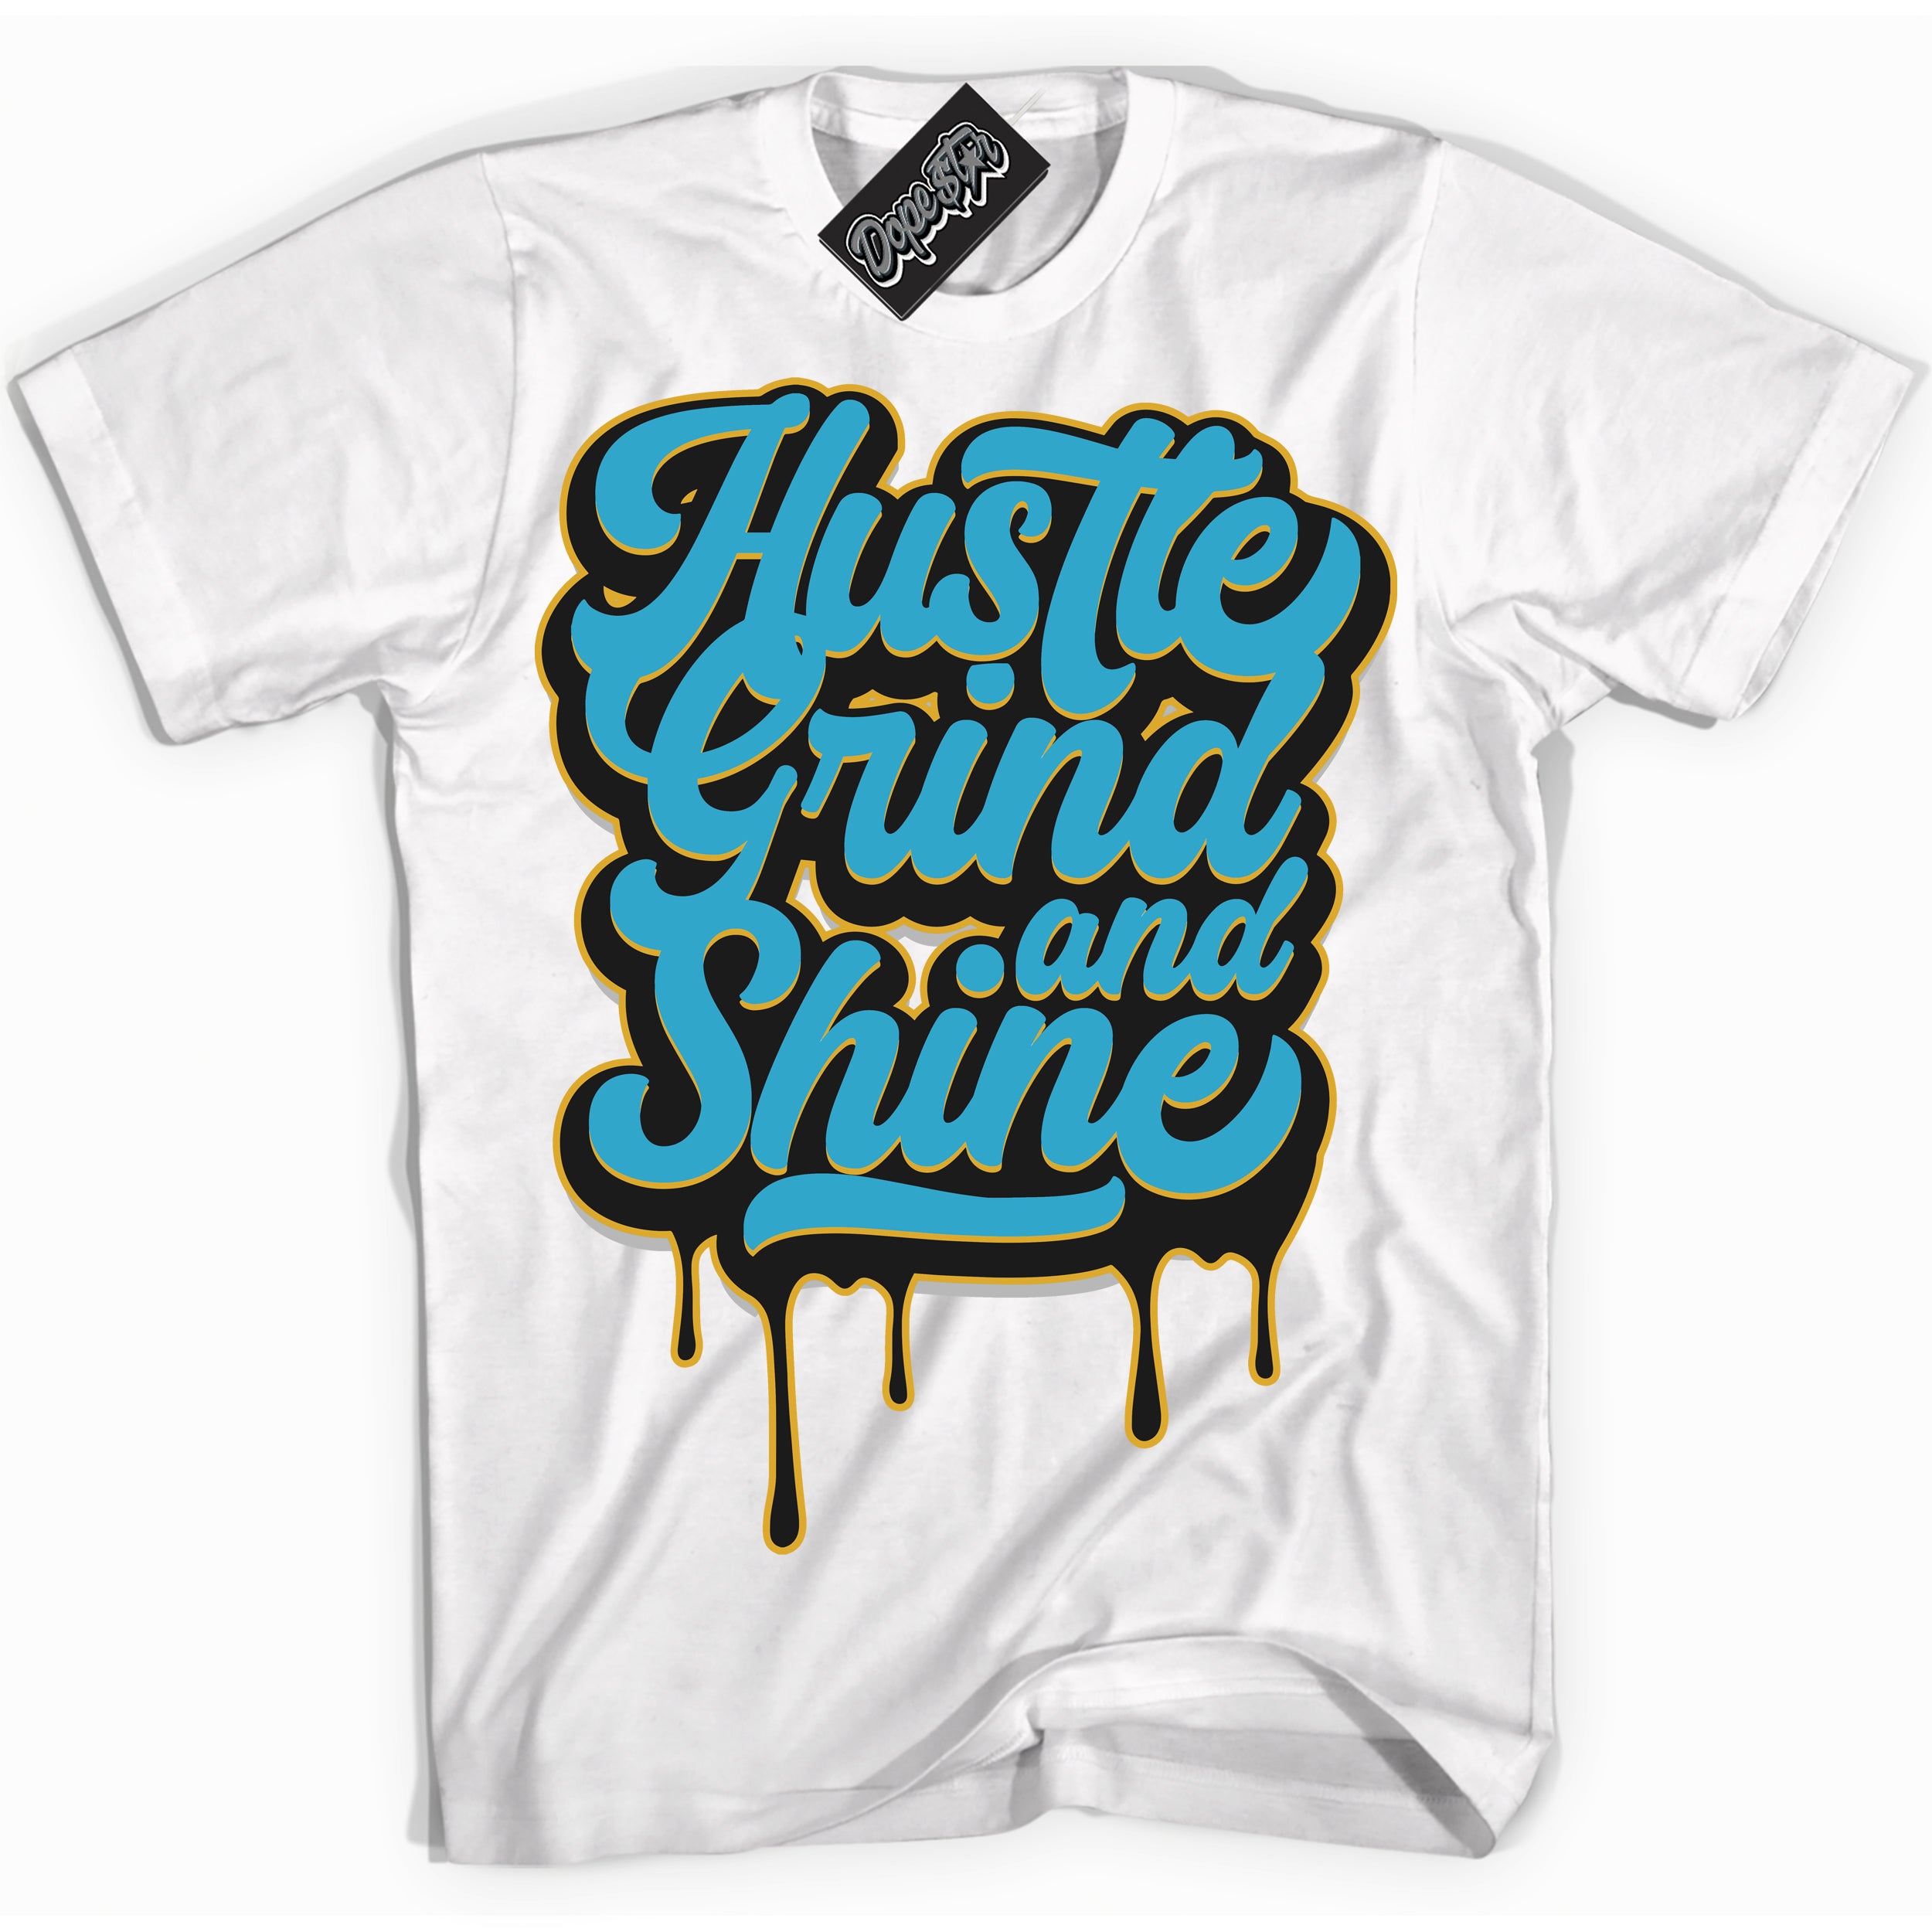 Cool White Shirt with “ Hustle Grind And Shine” design that perfectly matches Aqua 5s Sneakers.